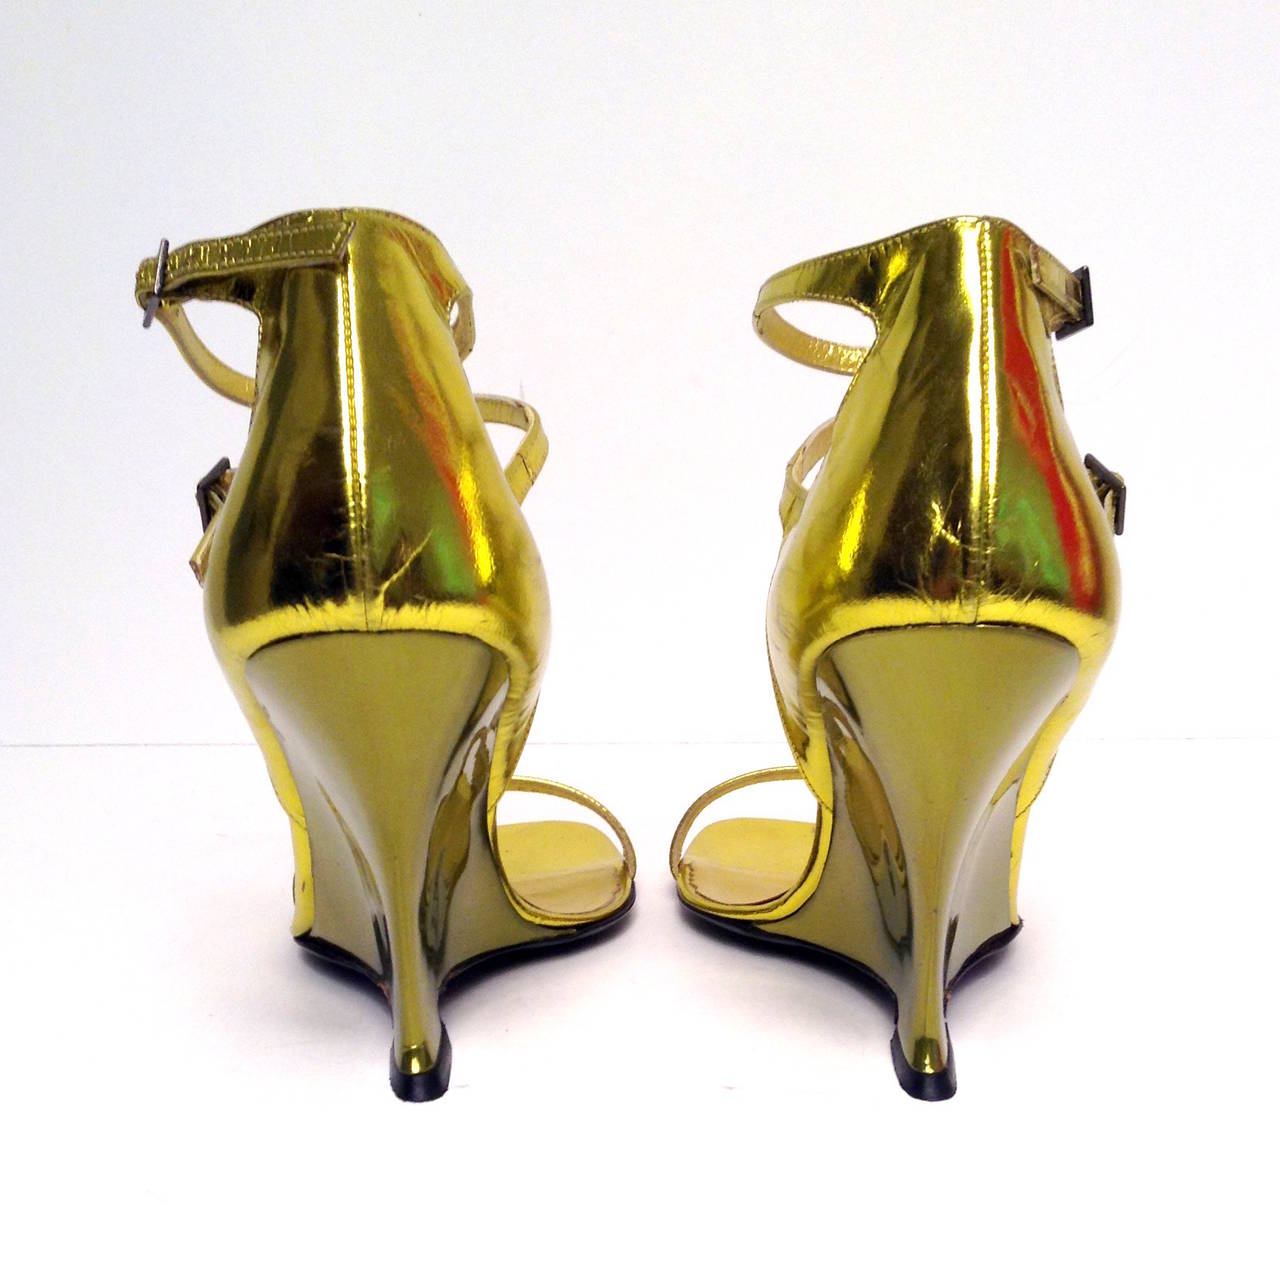 Yves Saint Laurent (Tom Ford) Iconic Gold wedges Size 38.5 In Excellent Condition For Sale In Toronto, Ontario